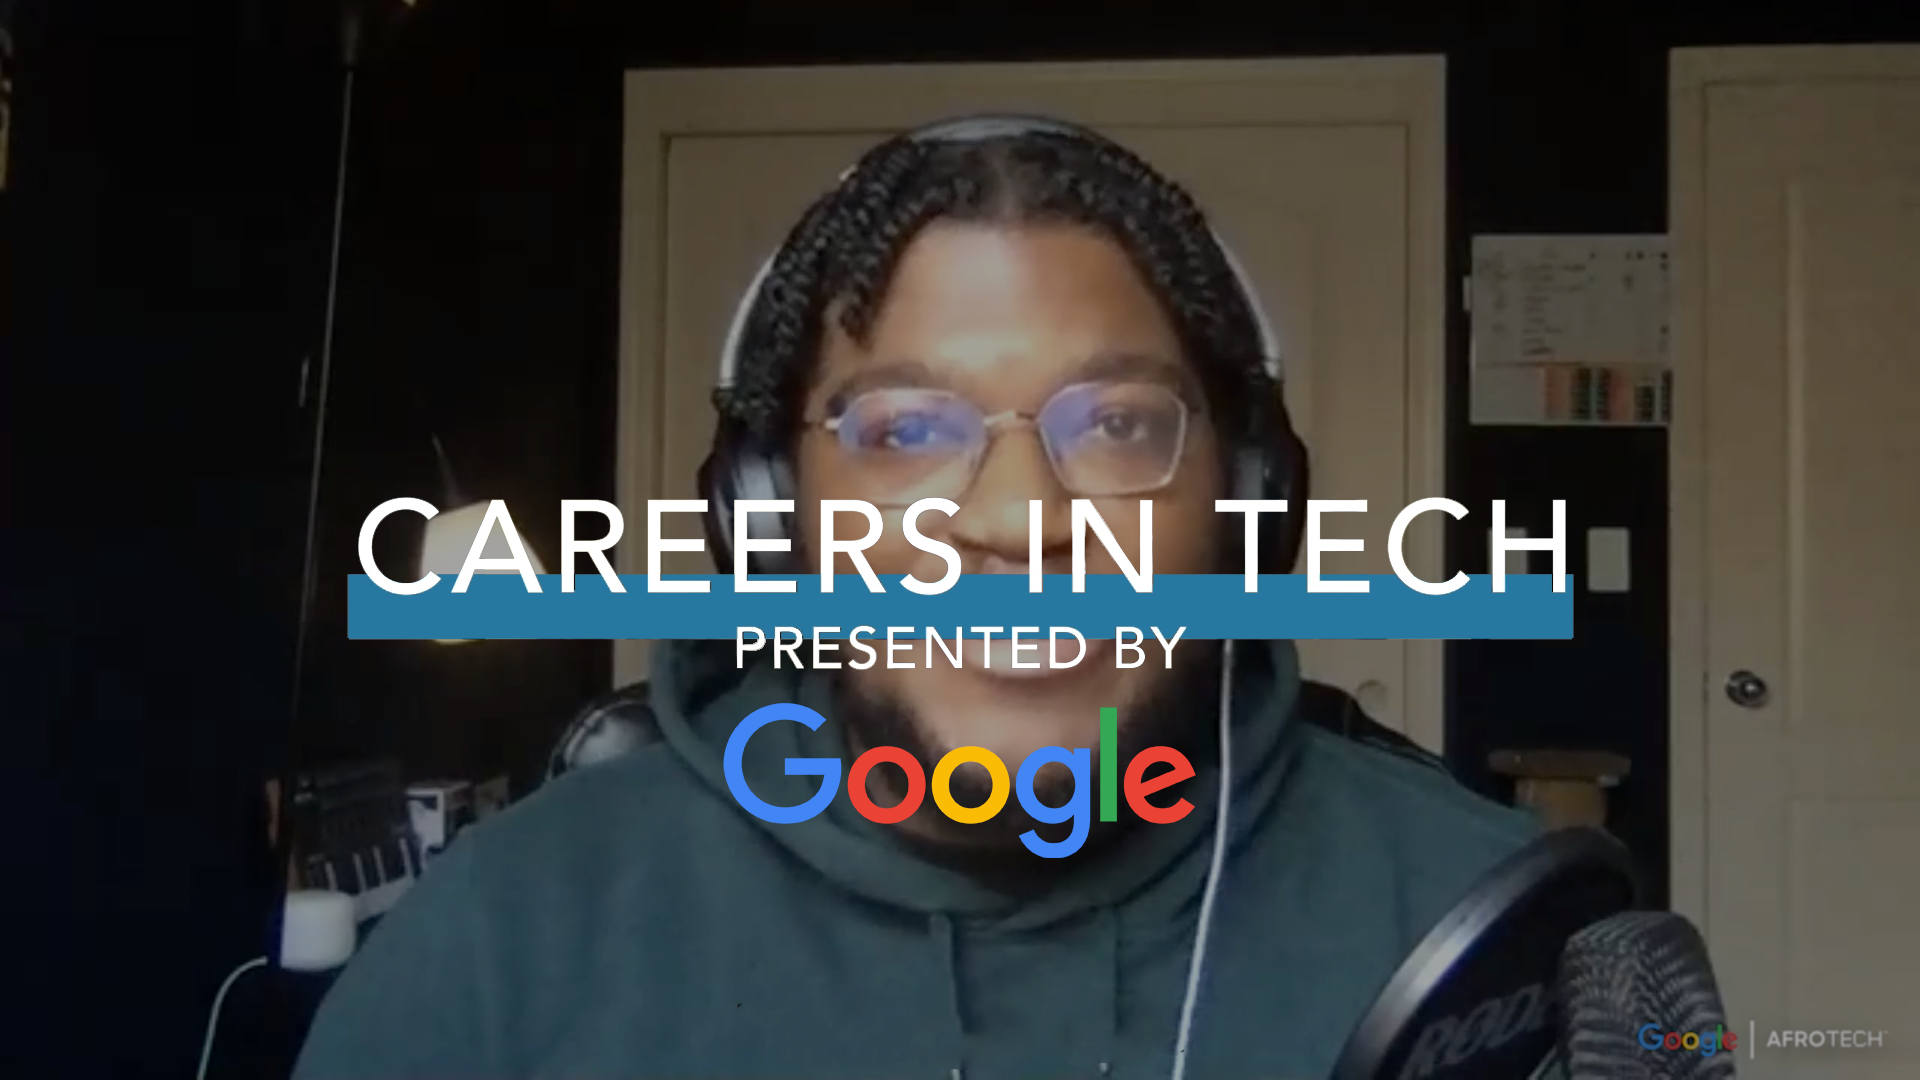 Careers In Tech: Google Software Engineer Blake Thrower Shares How Persistence Was The Key To Landing A Job In Tech